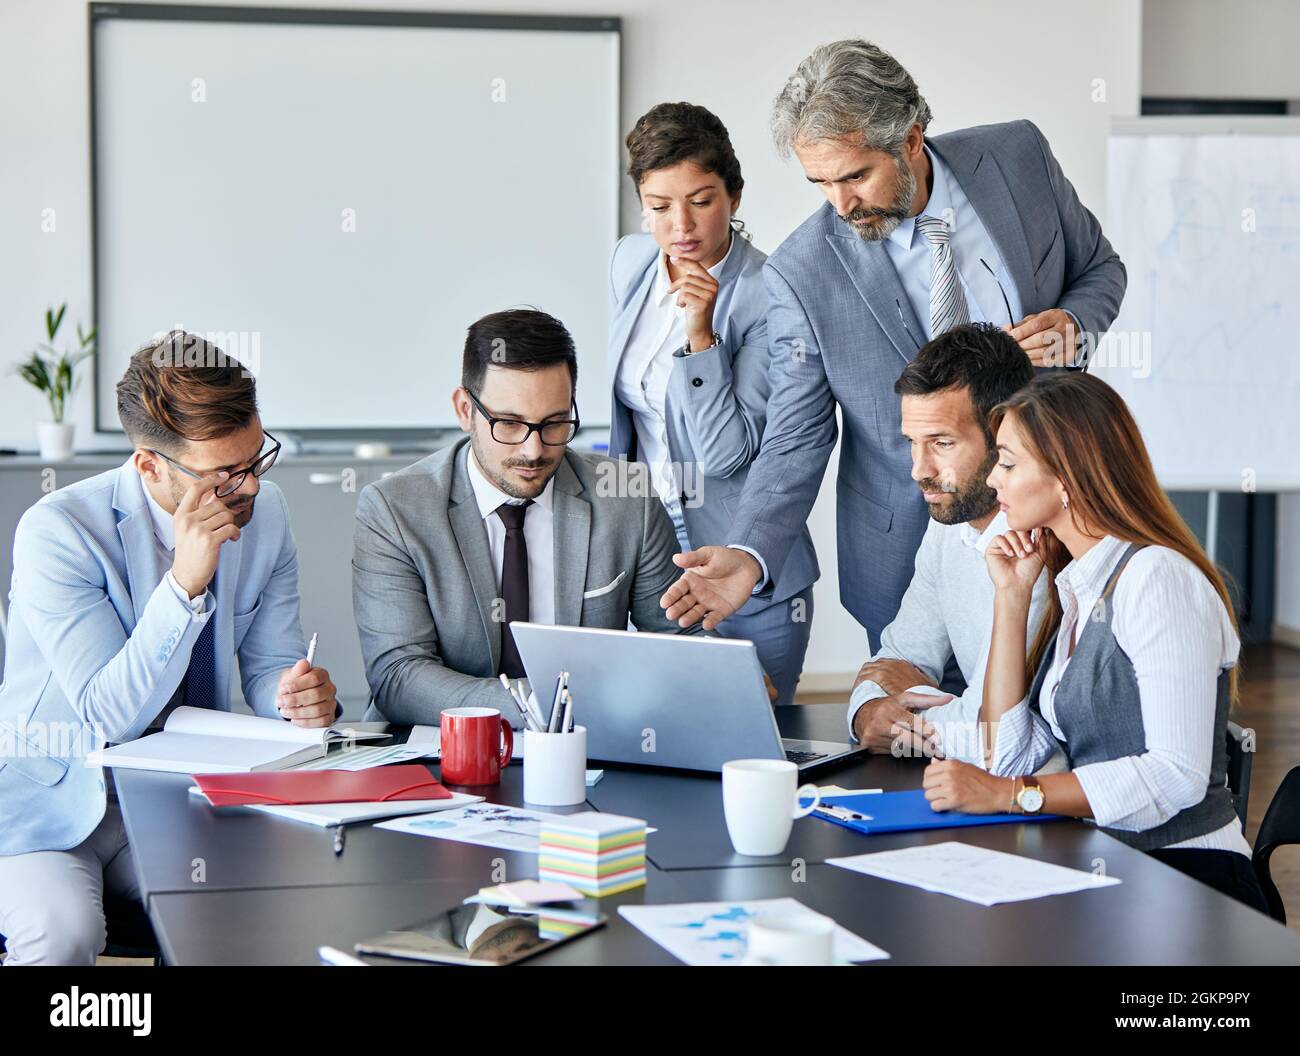 business meeting office conference team teamwork Stock Photo